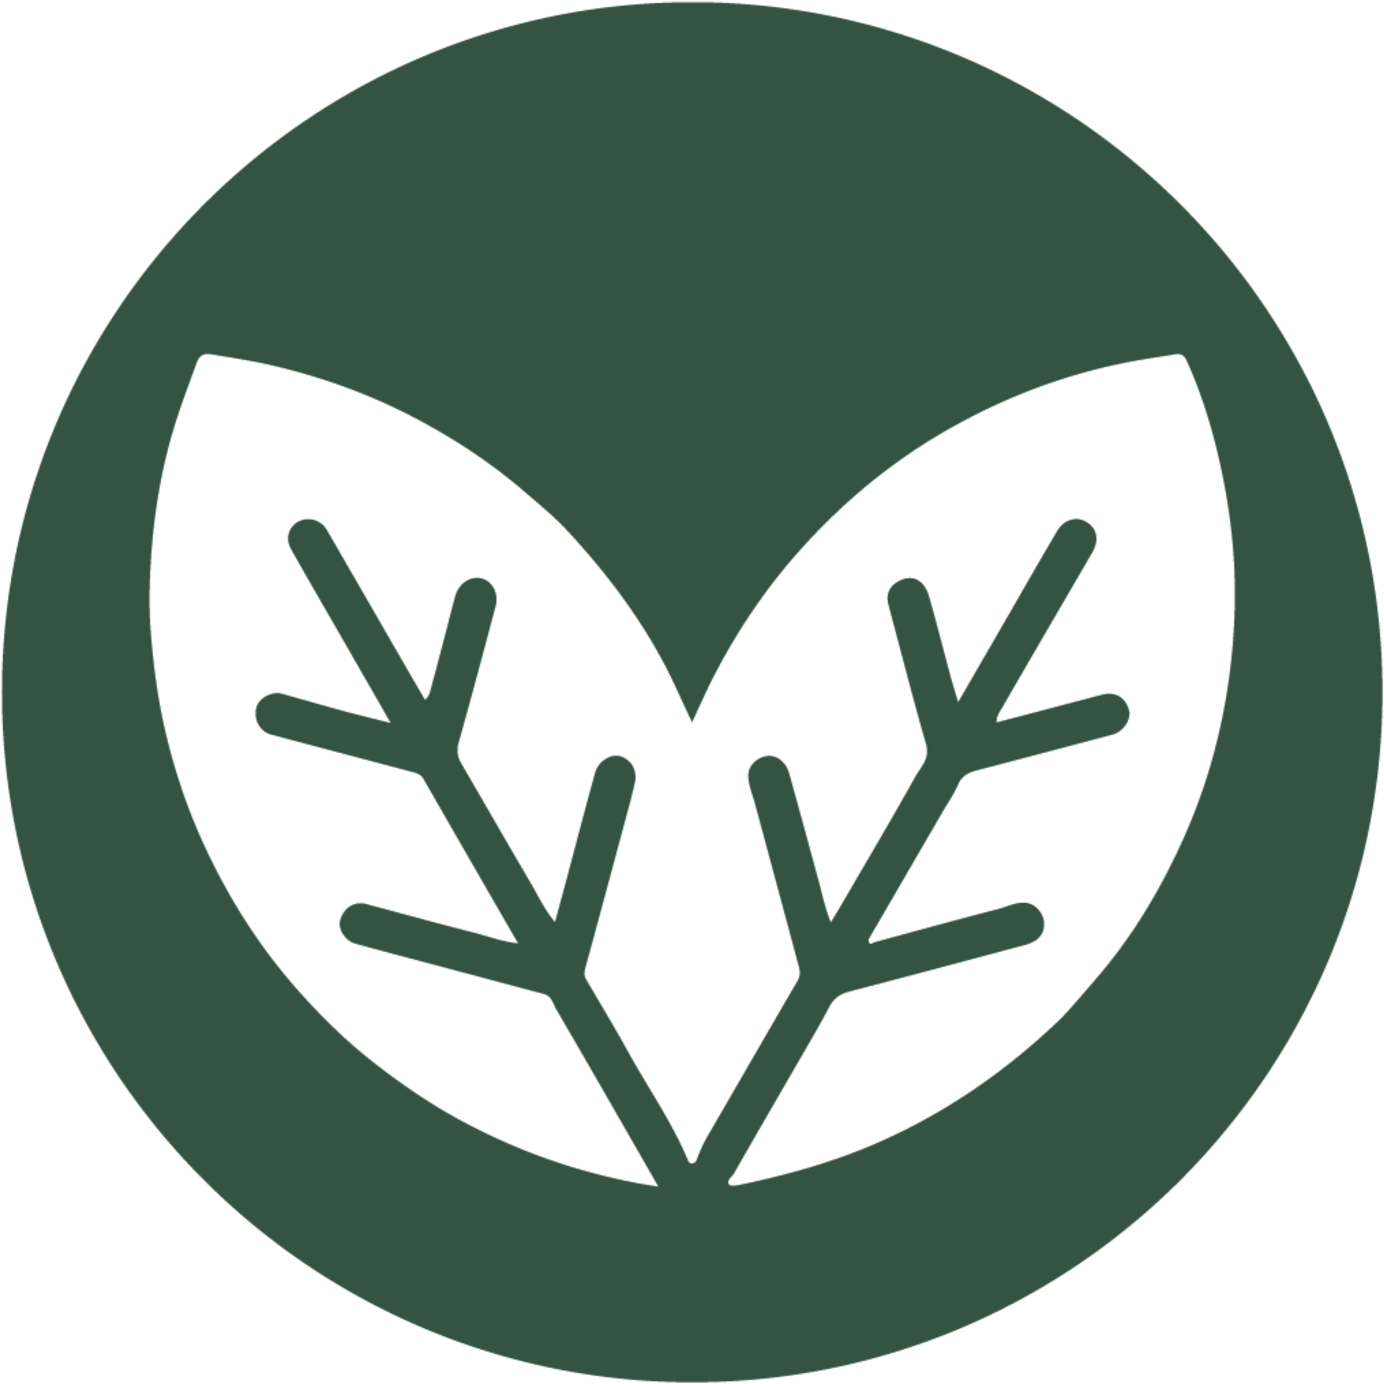 A Green Circle With White Leaves